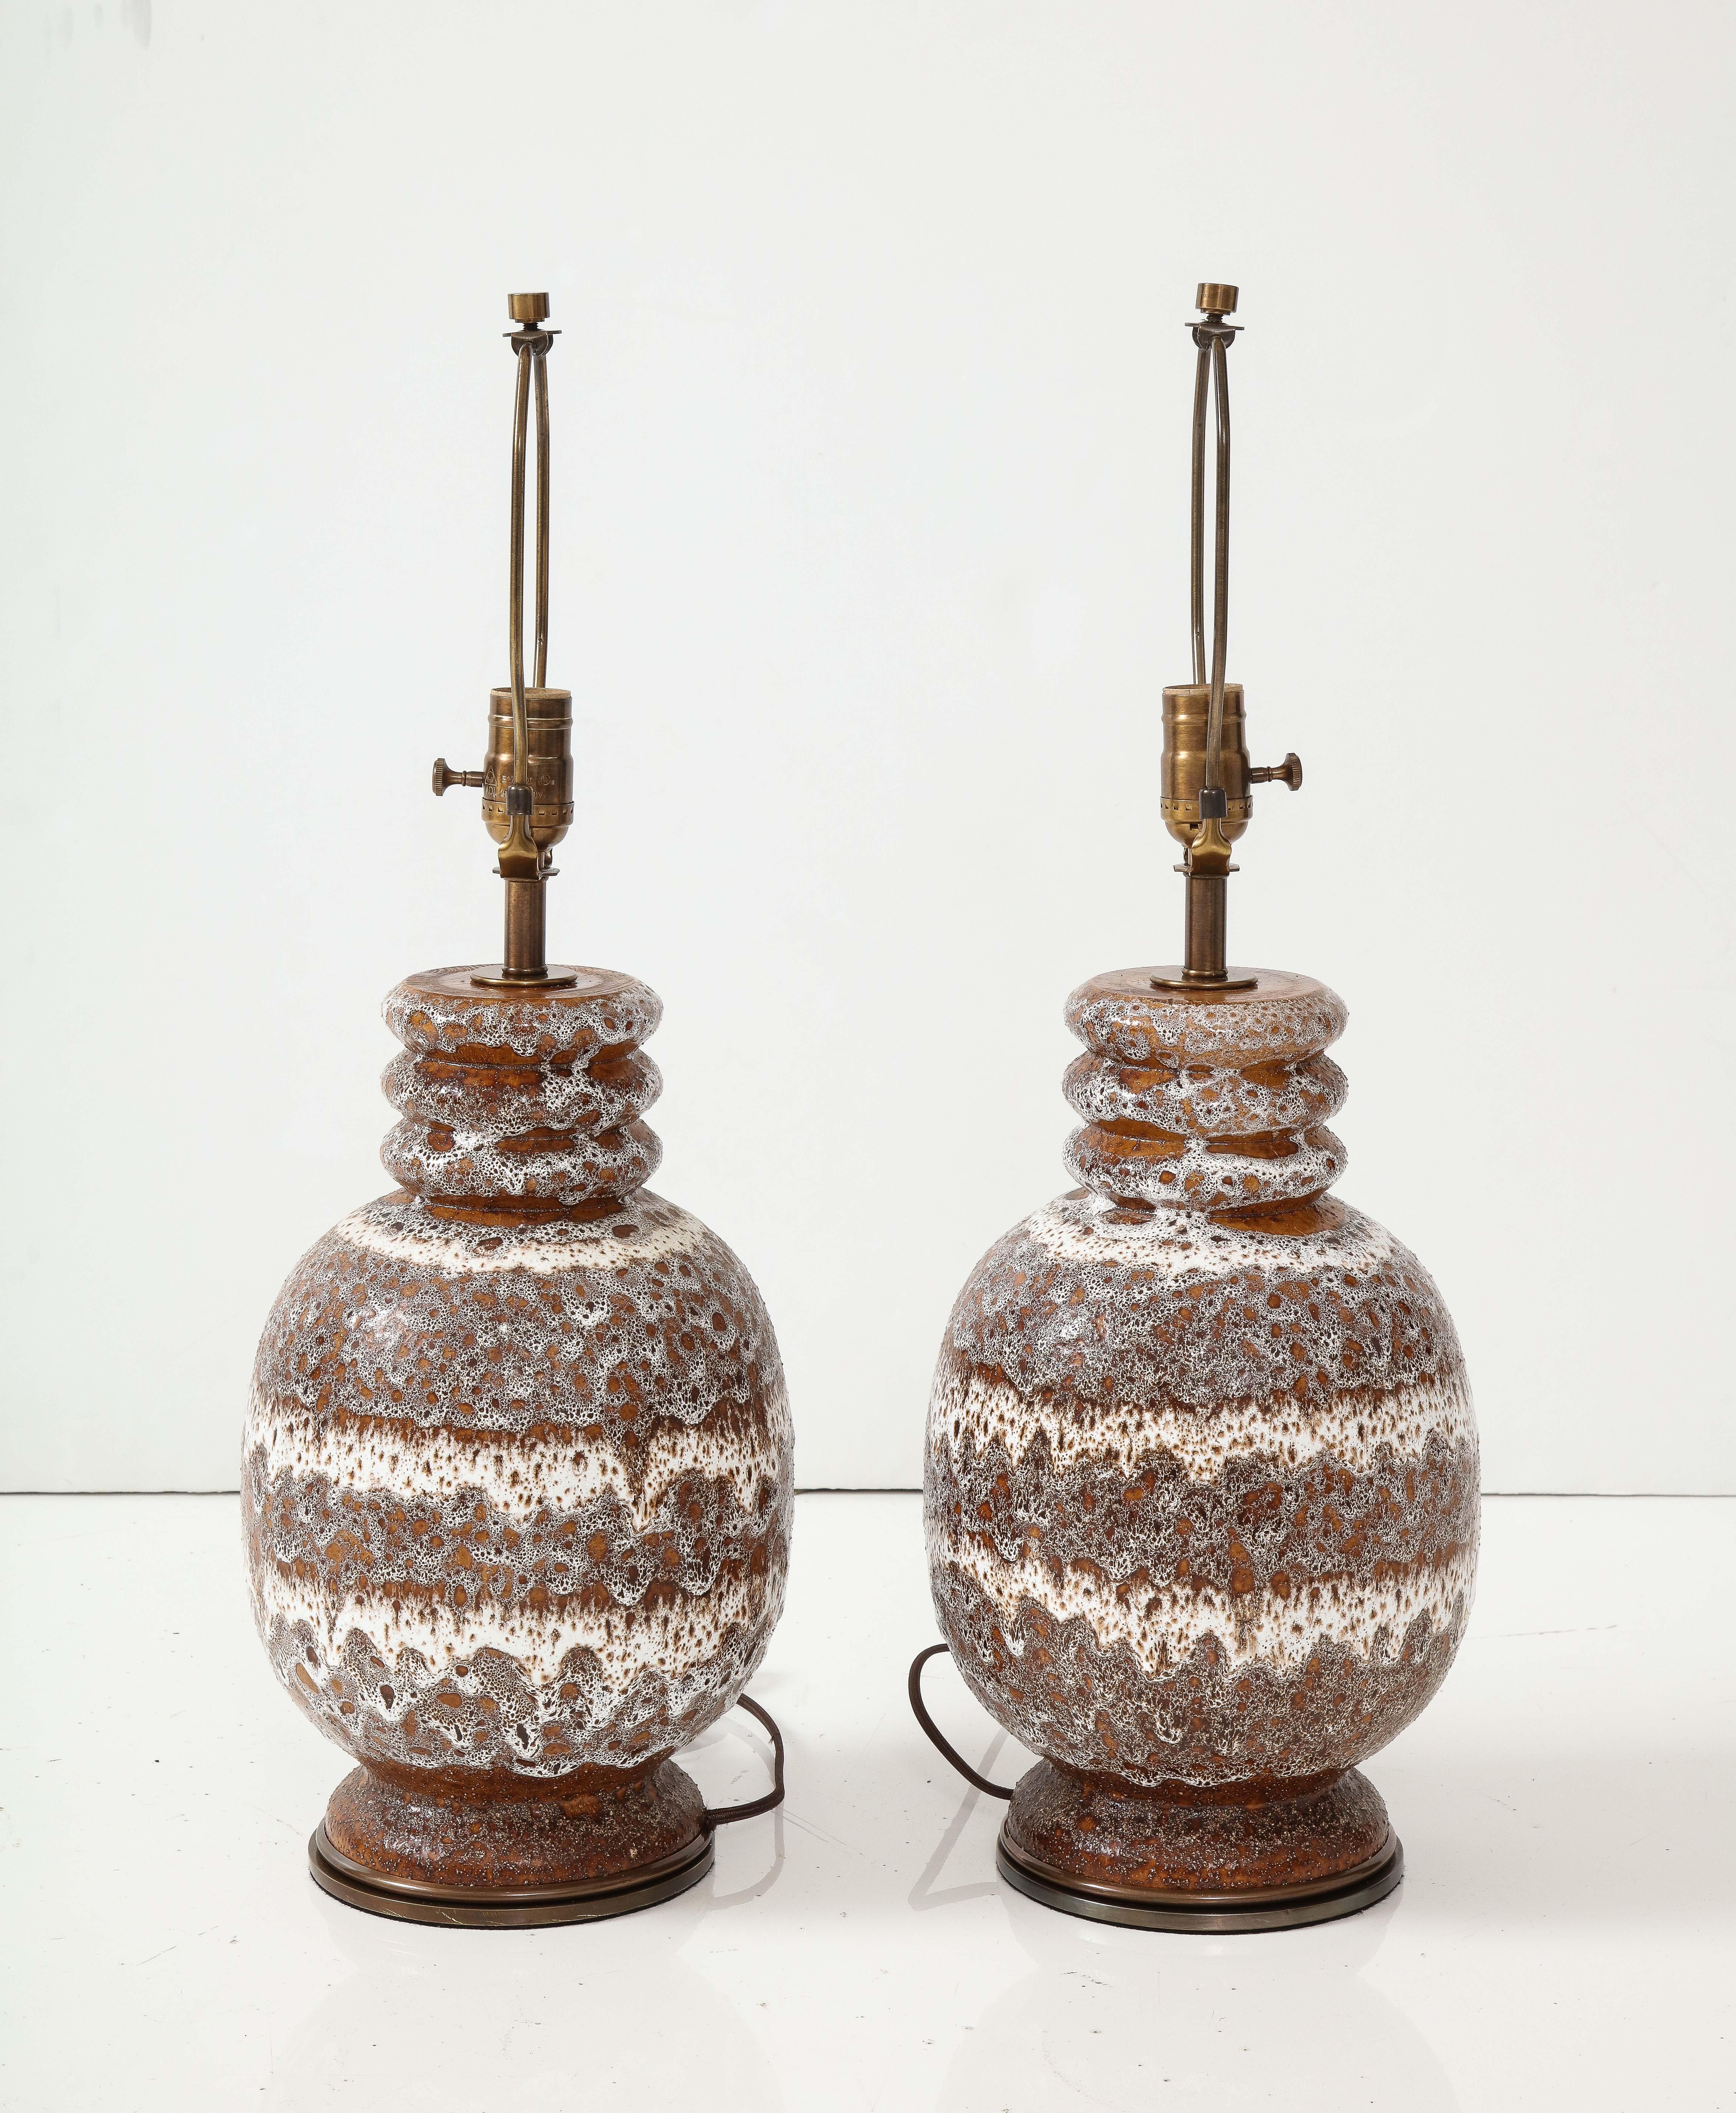 Pair of West German volcanic glazed ceramic lamps on aged bronze bases. Rewired for use in USA, 100W max bulbs.